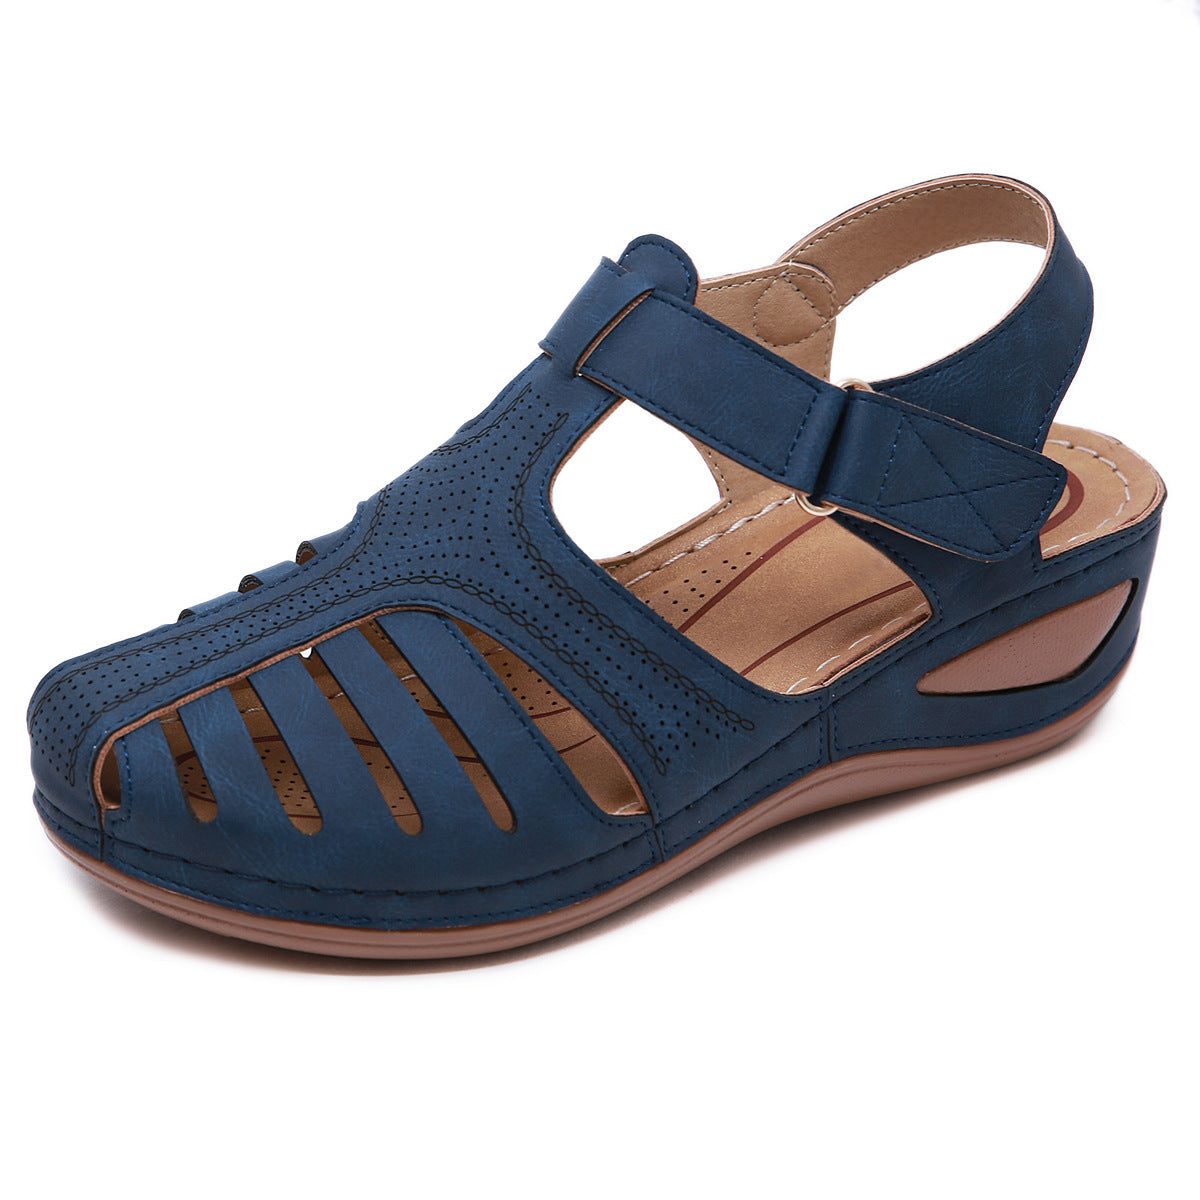 Closed Toe Velcro Wedge Sandals Navy